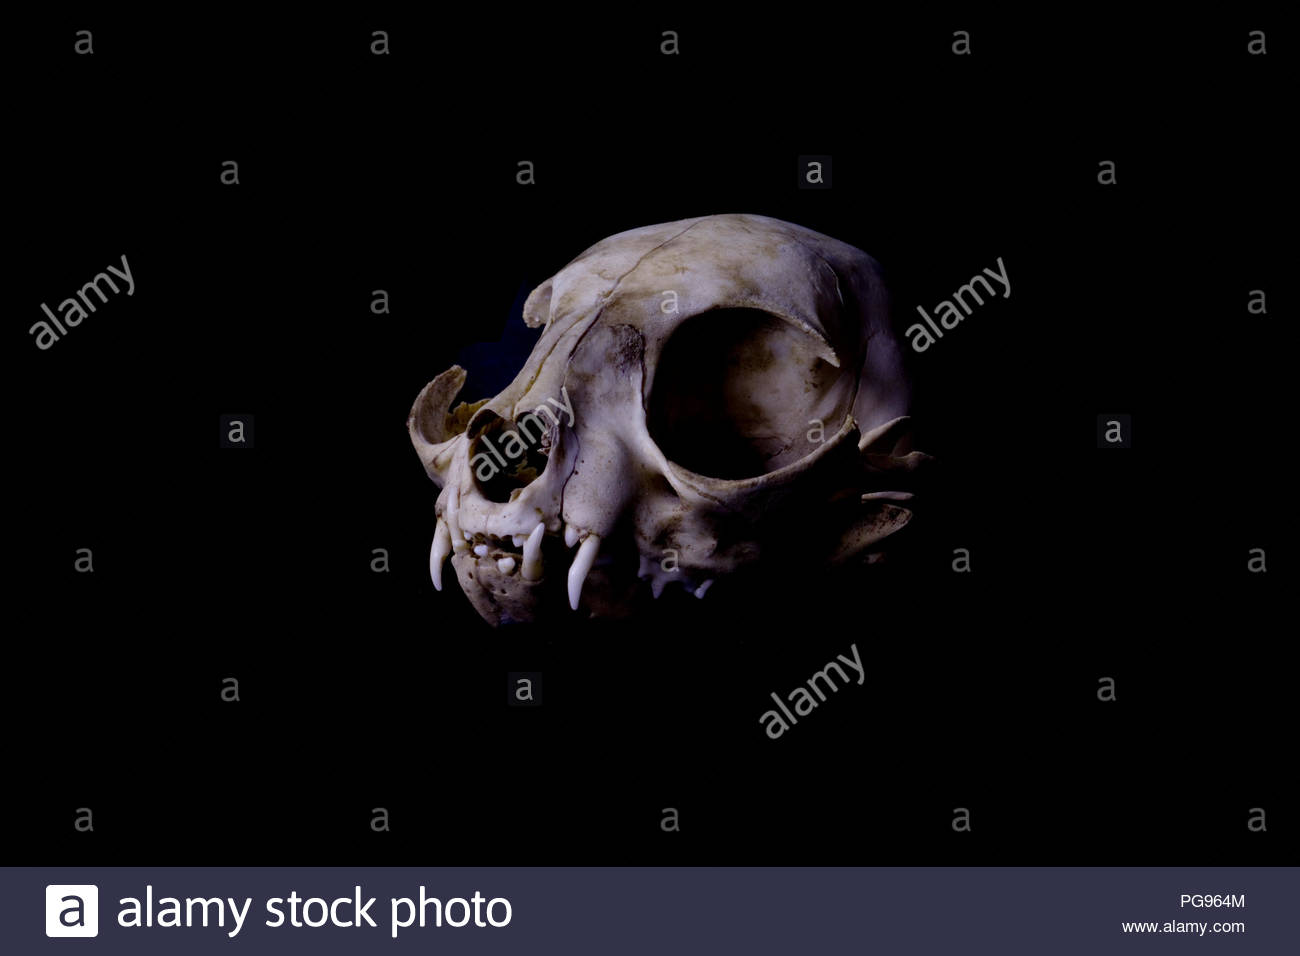 Cat Skull With Black Background Scientific Forensic And